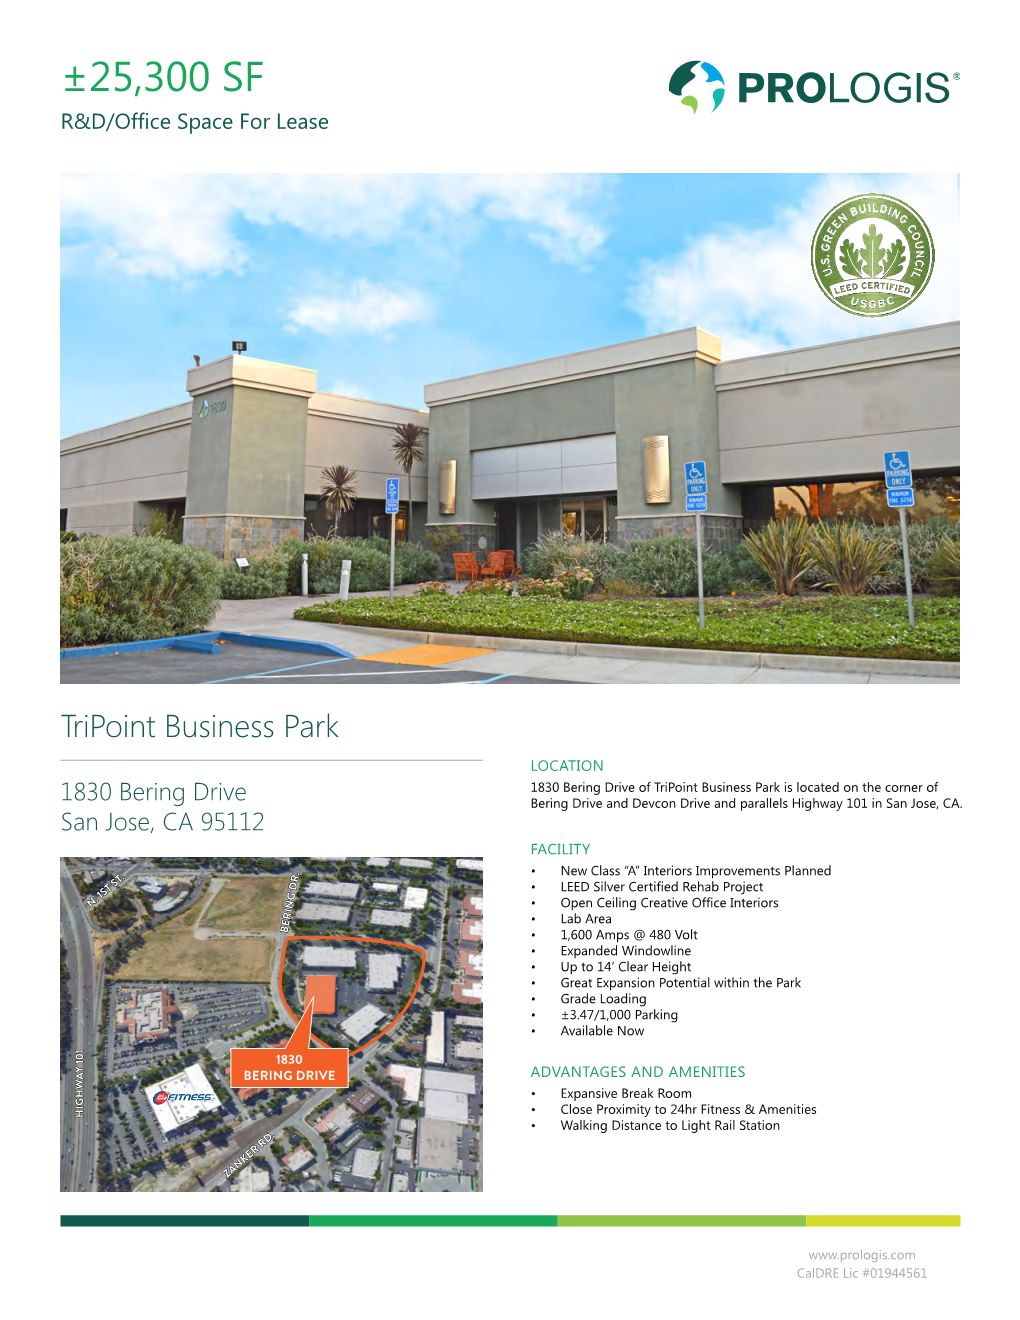 ±25,300 SF R&D/Office Space for Lease